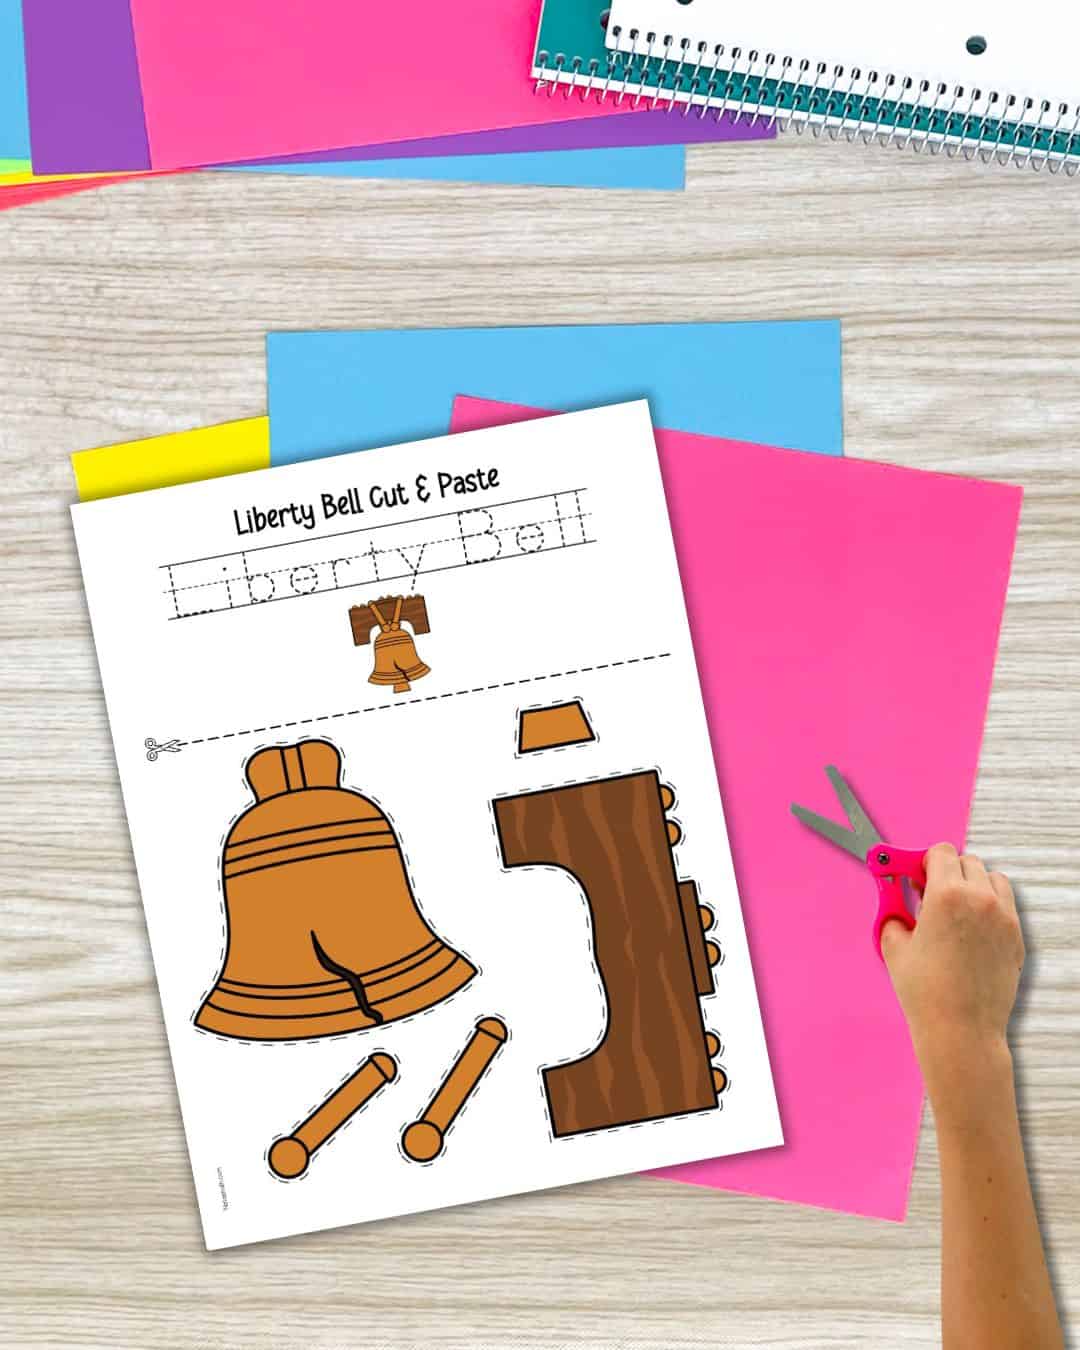 A Liberty Bell cut and paste craft with five pieces on the page. There is also space to trace the words "Liberty Bell" and a child's hand with a pair of blunt scissors.